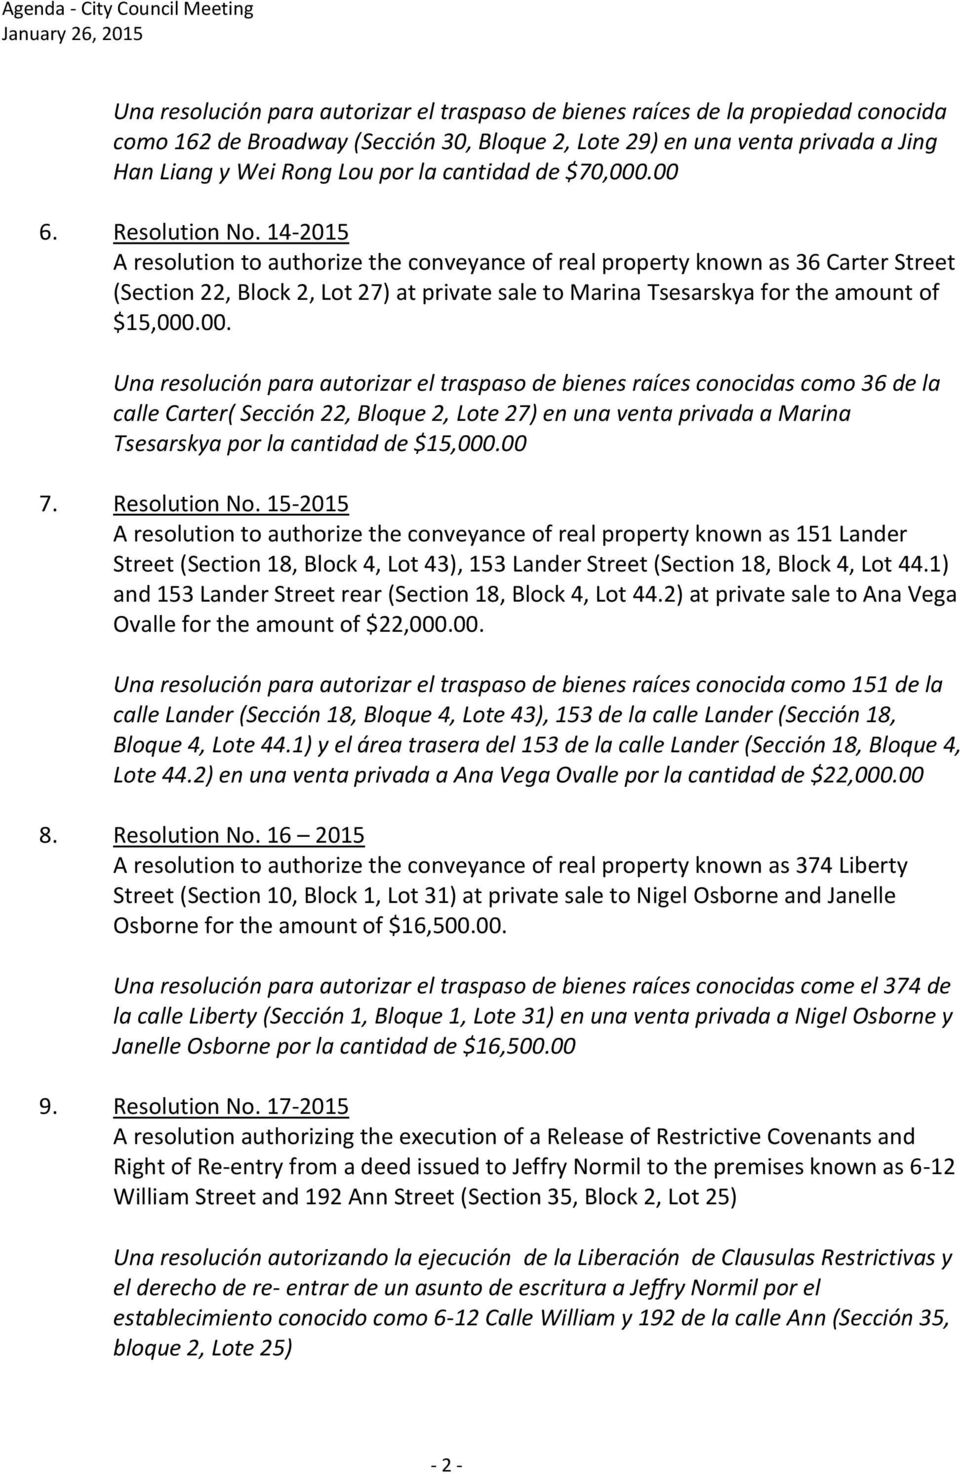 14-2015 A resolution to authorize the conveyance of real property known as 36 Carter Street (Section 22, Block 2, Lot 27) at private sale to Marina Tsesarskya for the amount of $15,000